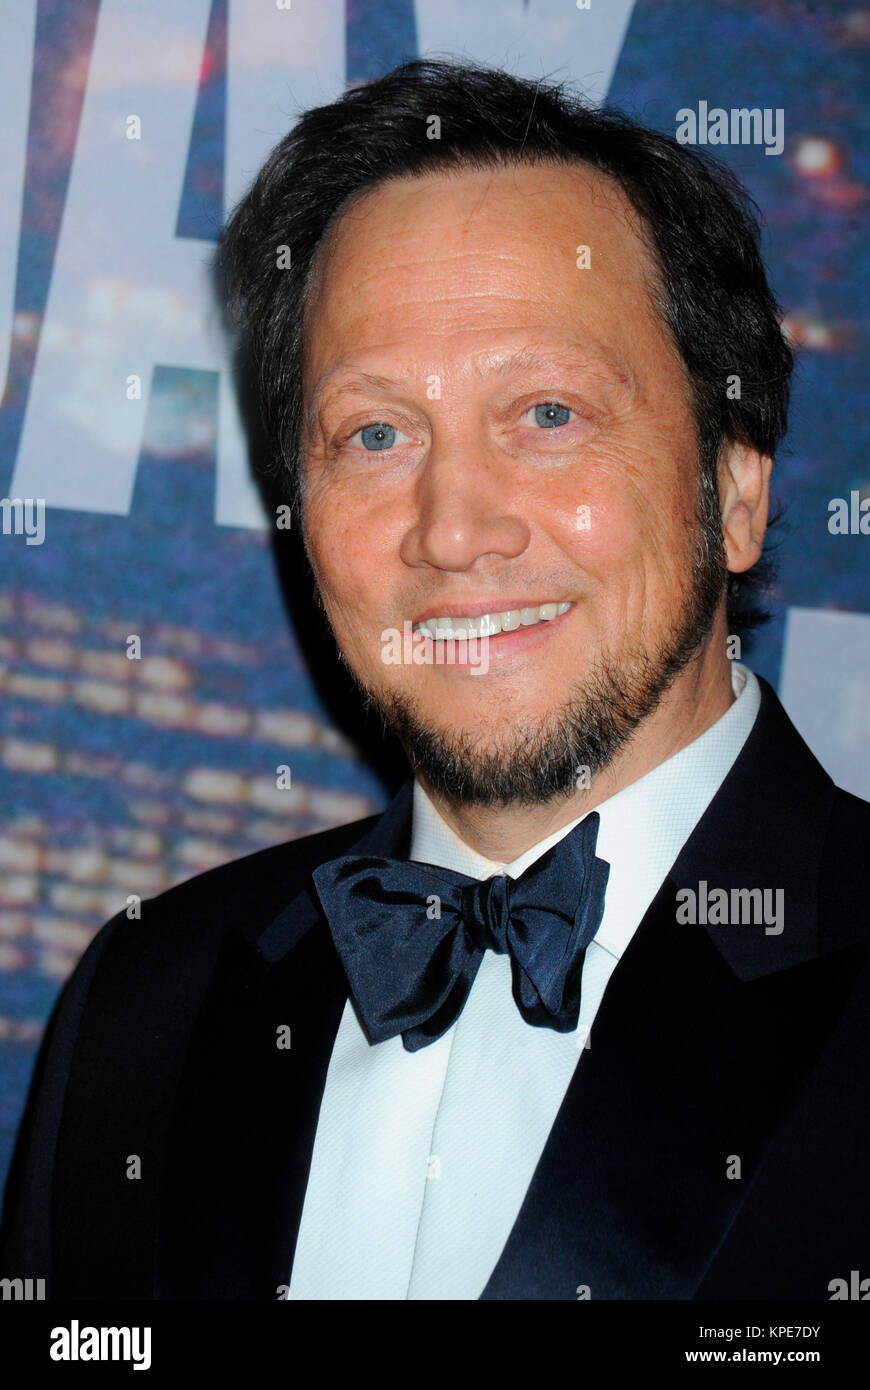 NEW YORK, NY - FEBRUARY 15: Rob Schneider attends the SNL 40th Anniversary Celebration at Rockefeller Plaza on February 15, 2015 in New York City.  People:  Rob Schneider Stock Photo